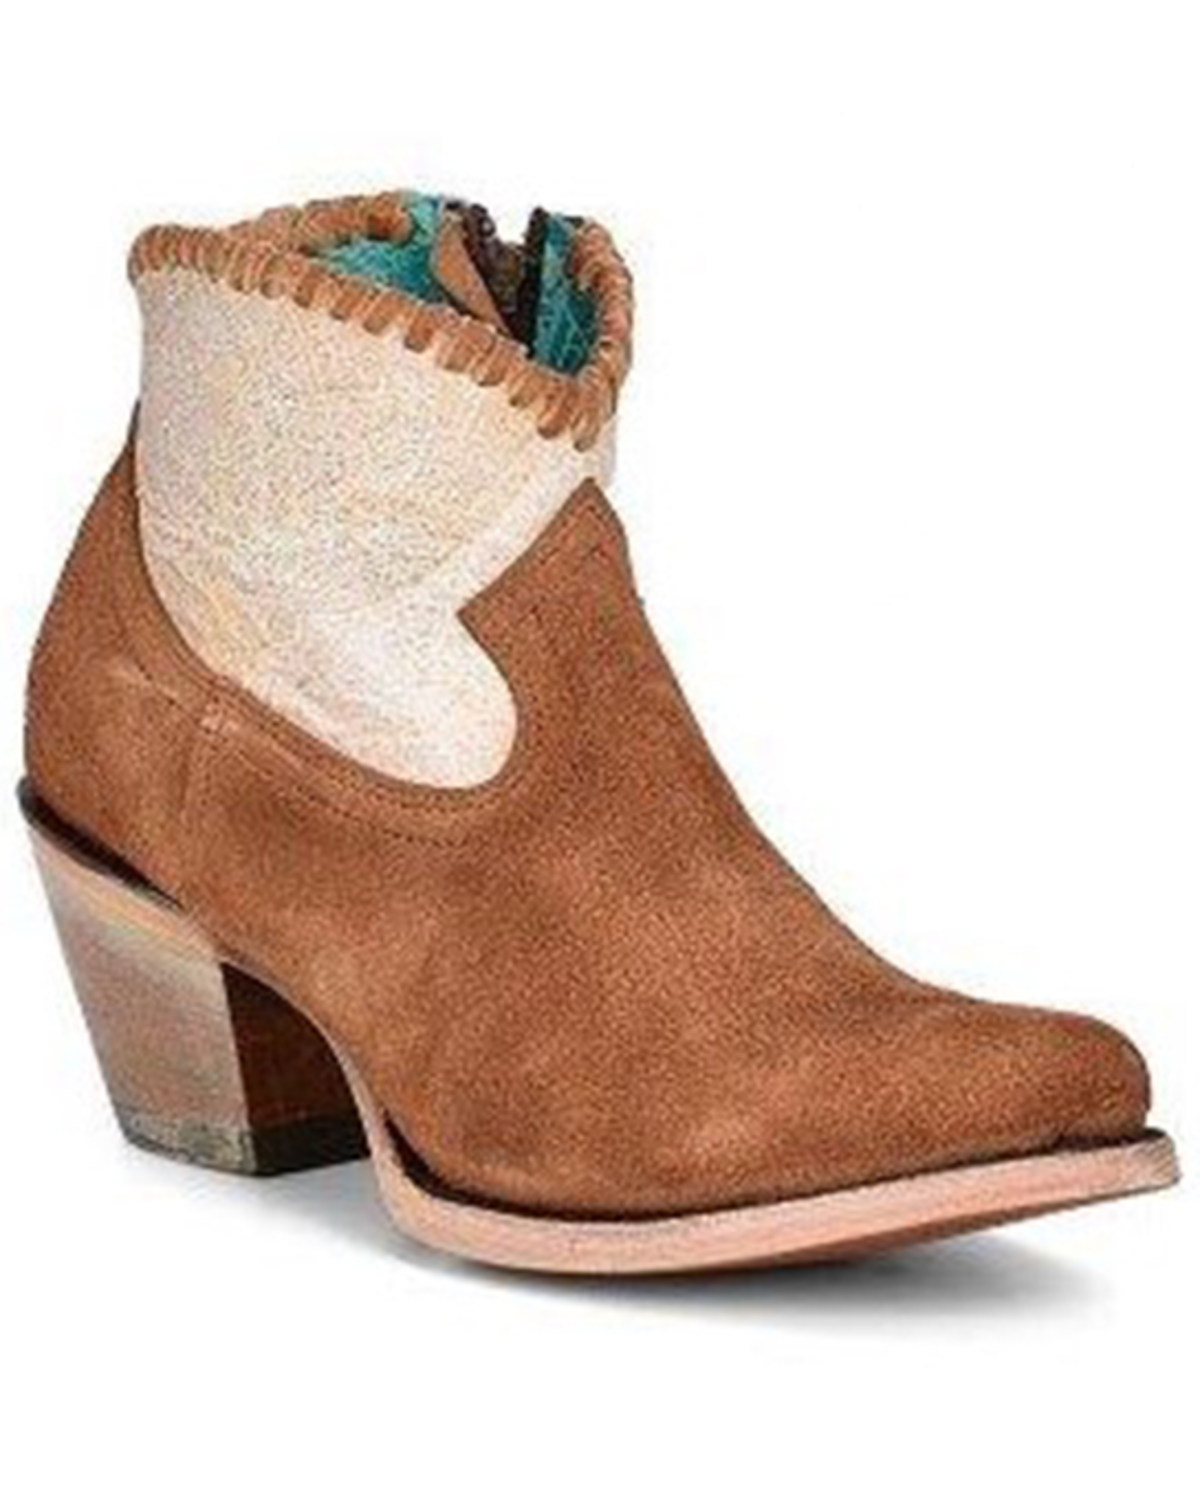 Corral Women's Urban Woven Shaft Western Fashion Booties - Pointed Toe